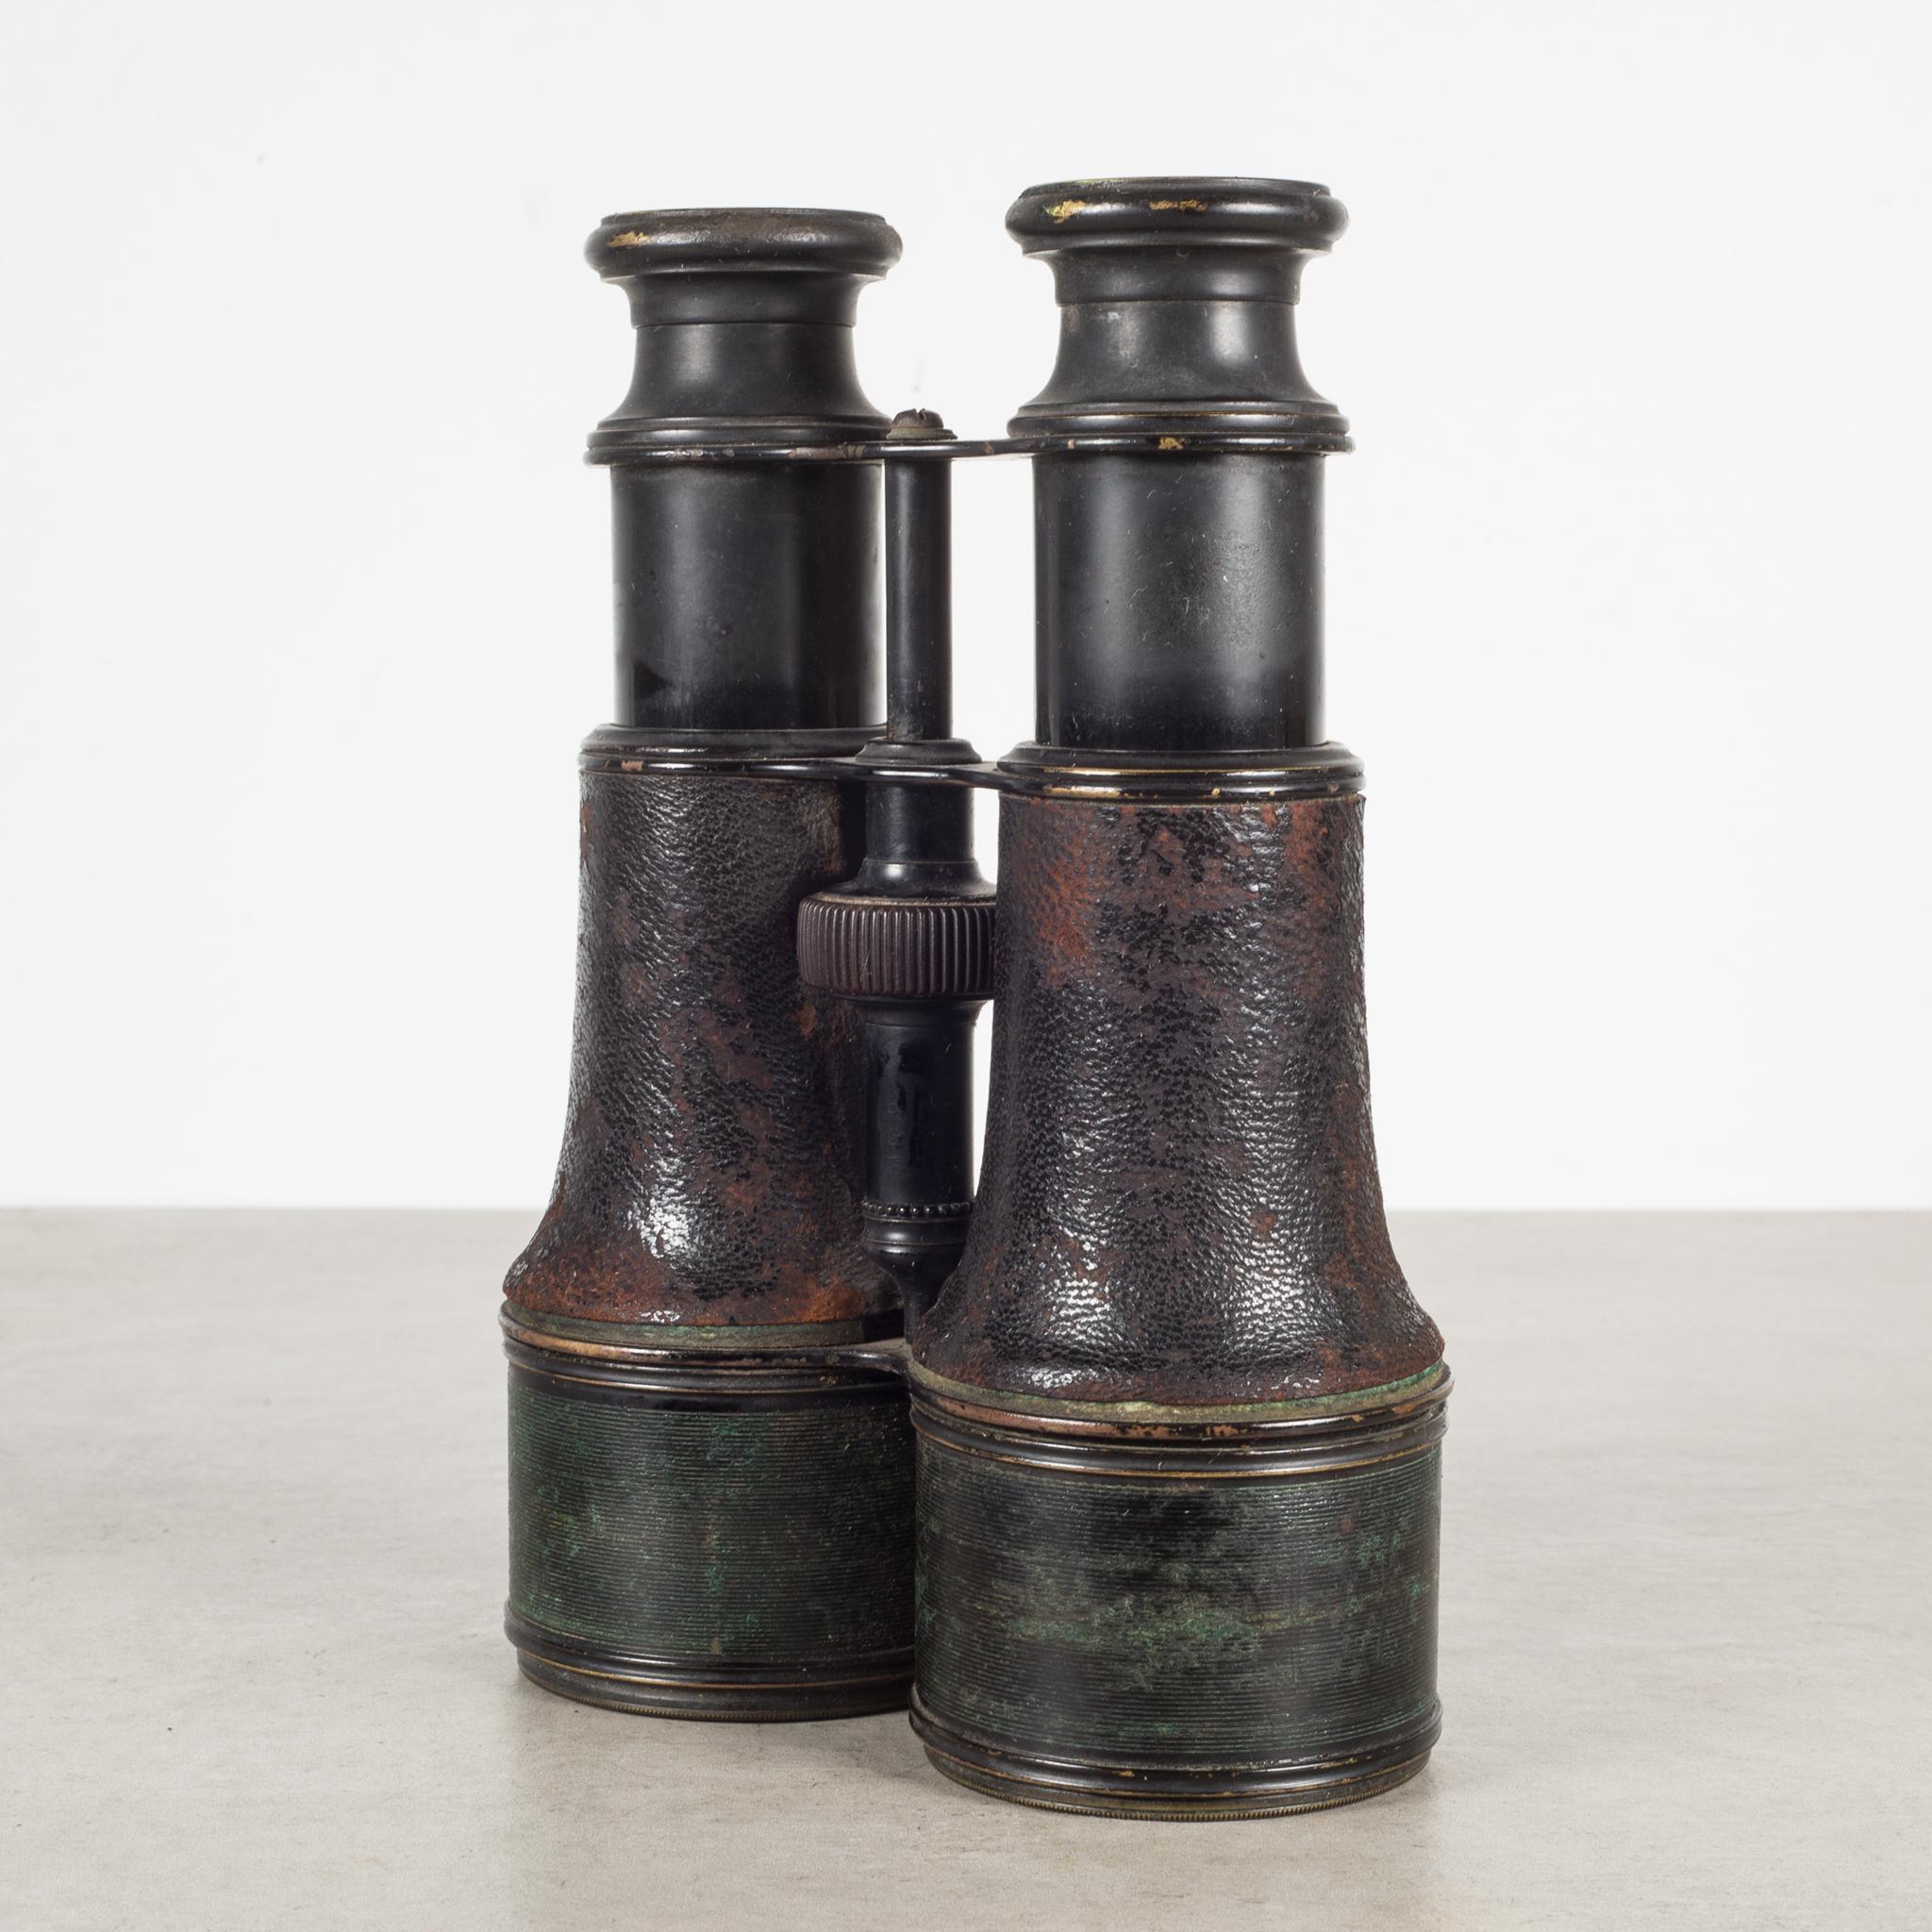 About

This is an original pair of leather wrapped military binoculars and original leather case. This large pair of binoculars has 